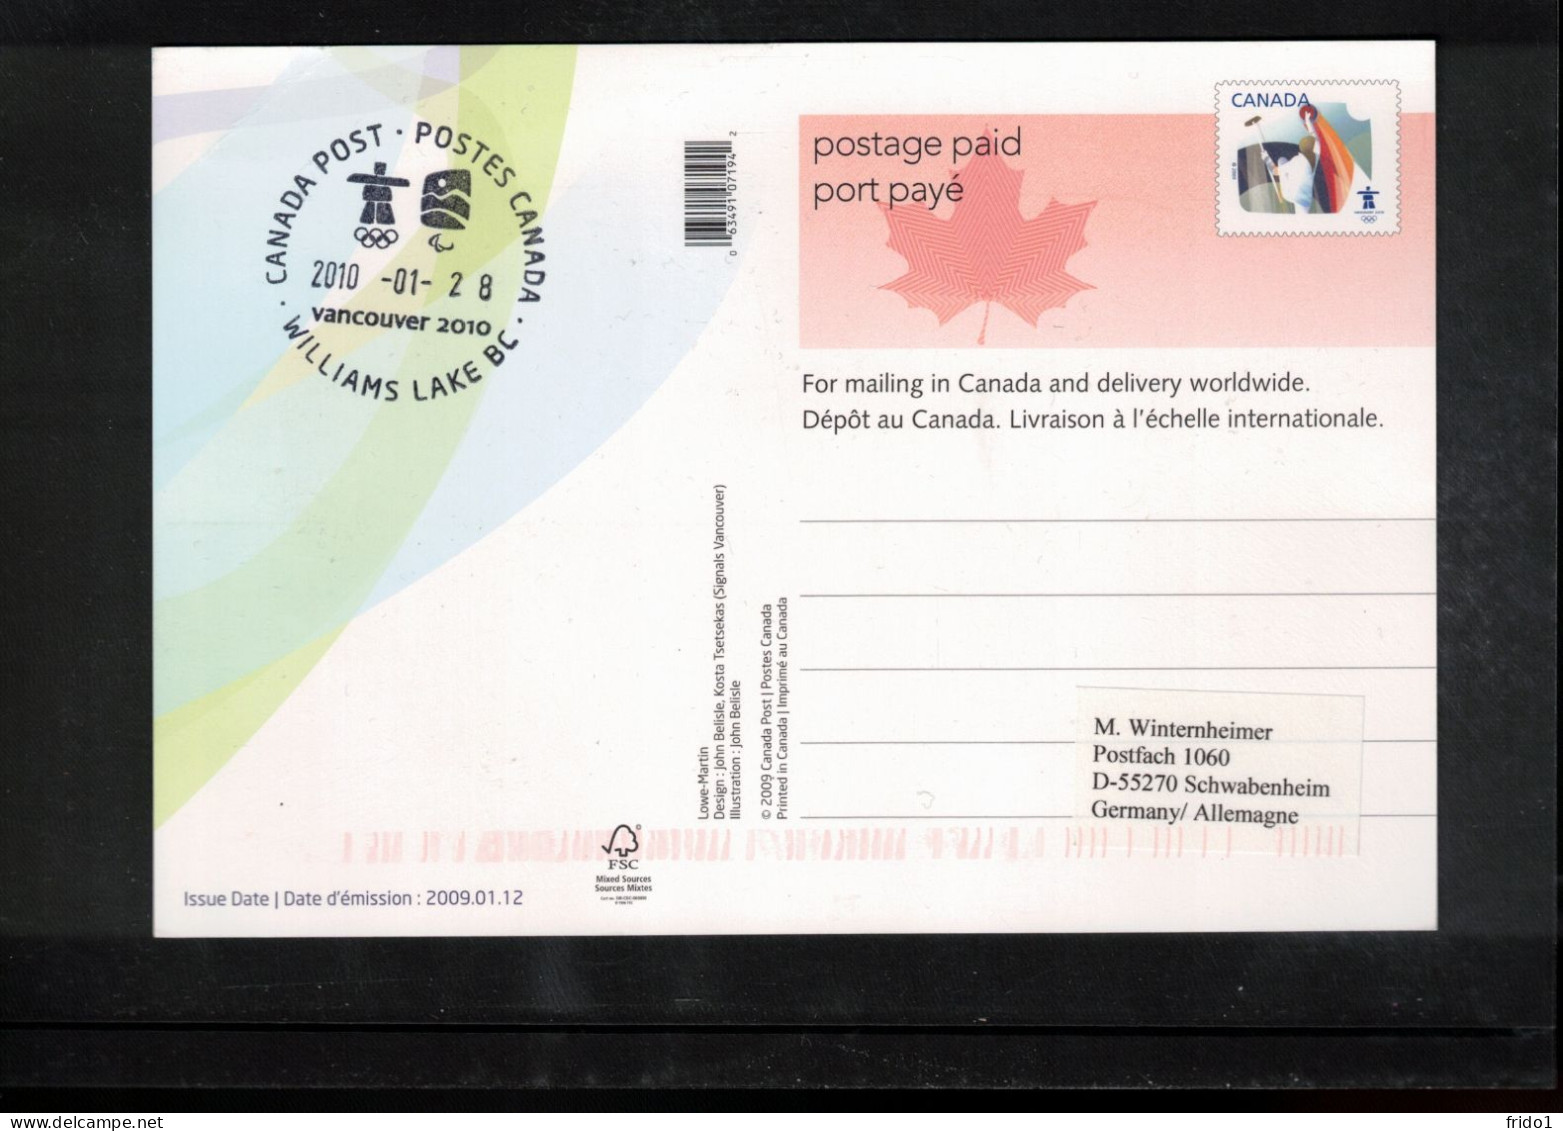 Canada 2010 Olympic Games Vancouver - WILLIAMS LAKE BC Postmark Interesting Postcard - Winter 2010: Vancouver